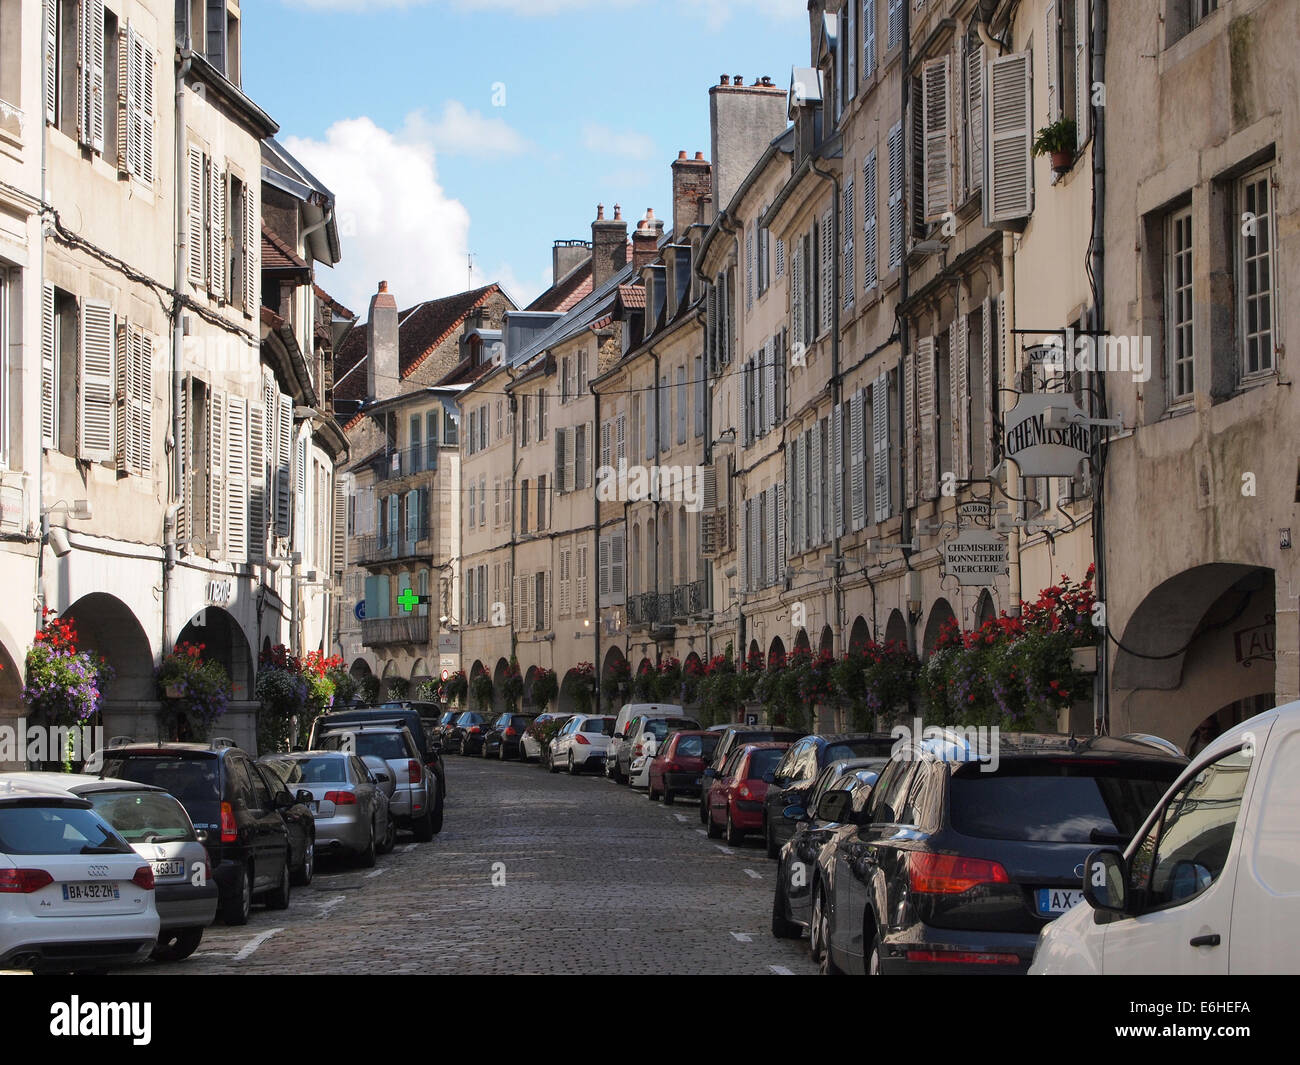 Typical street in Lons le Saunier, Jura region, France Stock Photo